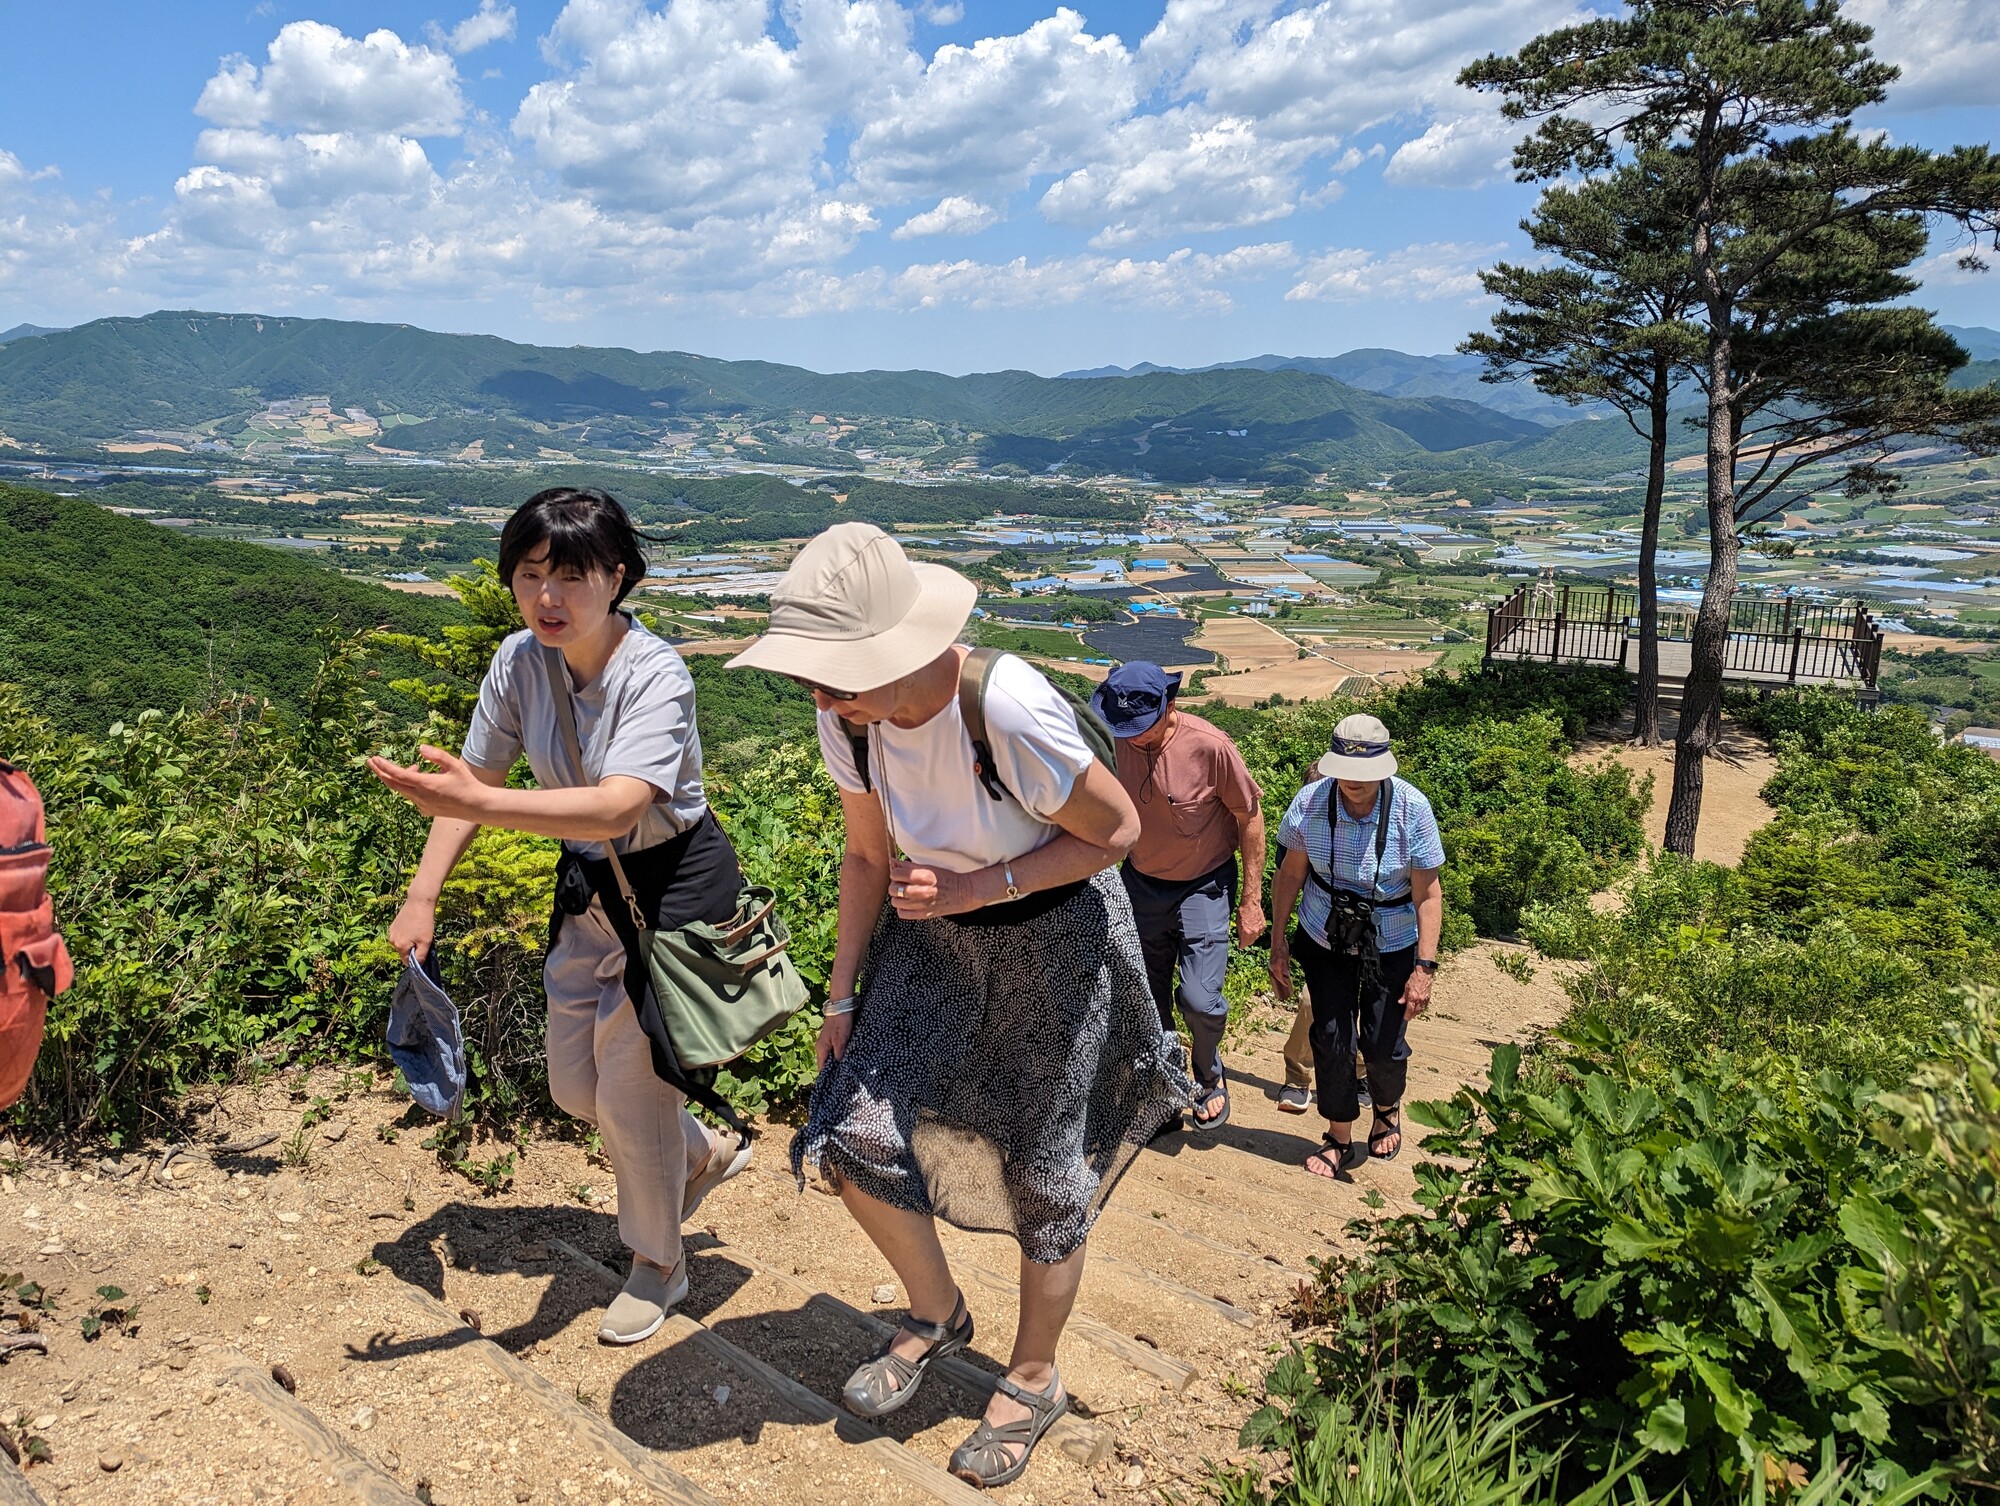 A group of people walking up a hill with a hilly landscape in the background